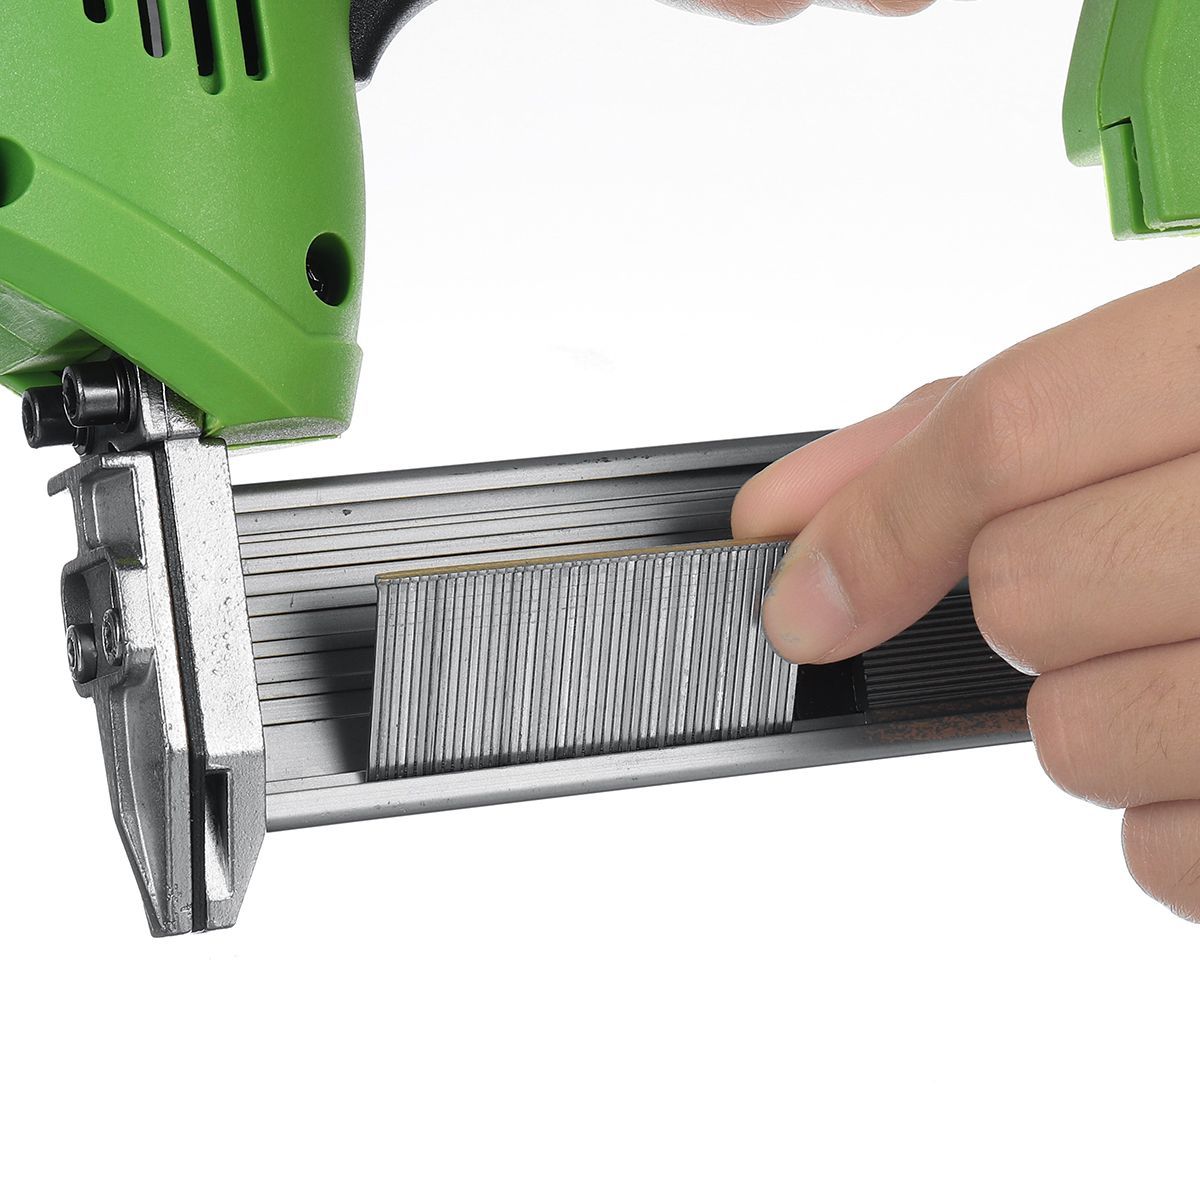 220V-Electric-Brad-Nail-U-Type-Staple-Dual-Use-Staple-Woodworking-Tools-Green-1683431